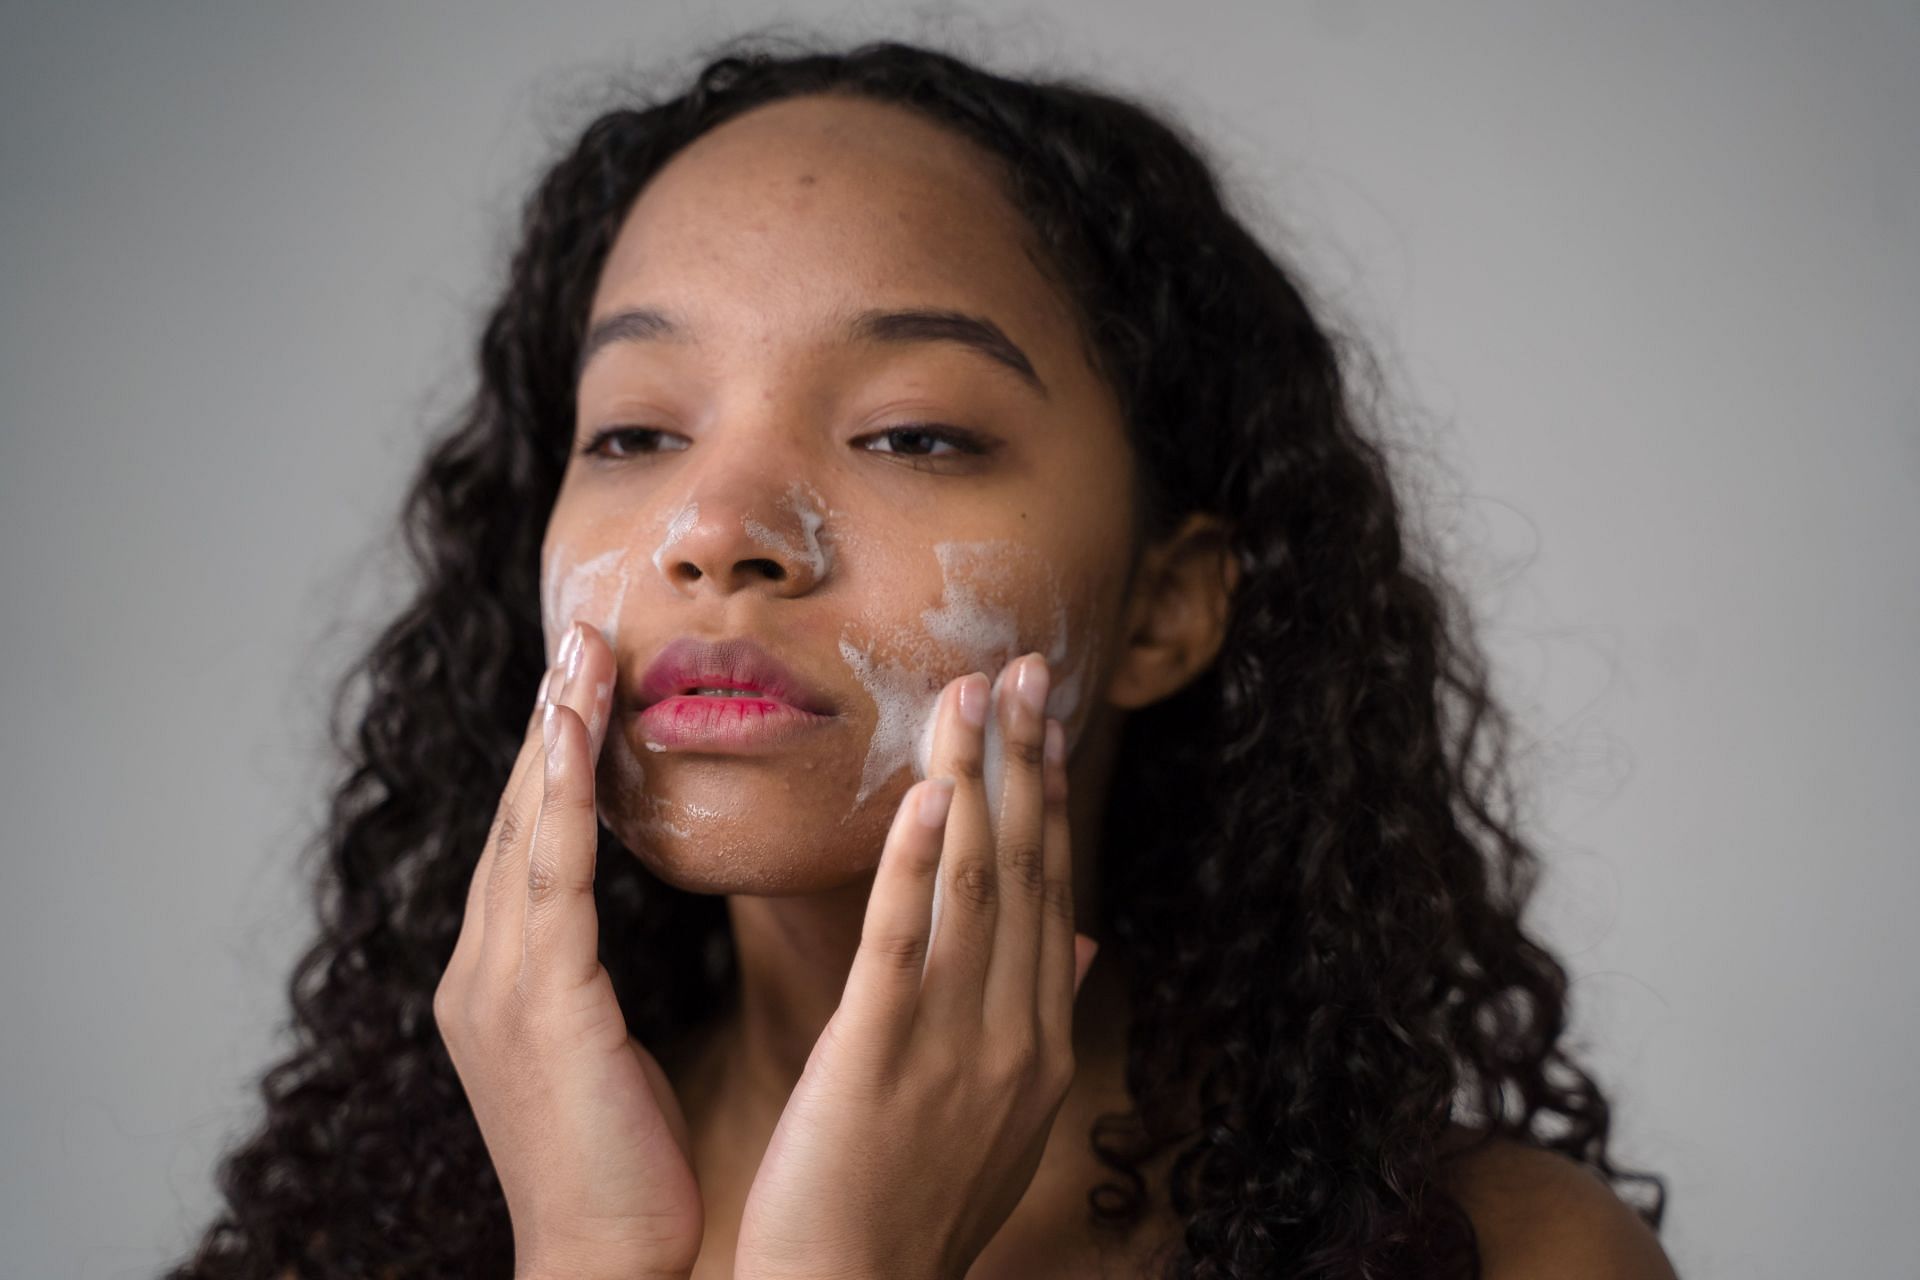 Clean your face with a face wash properly before applying a pimple patch. (Image via Pexels/Ron Lach)